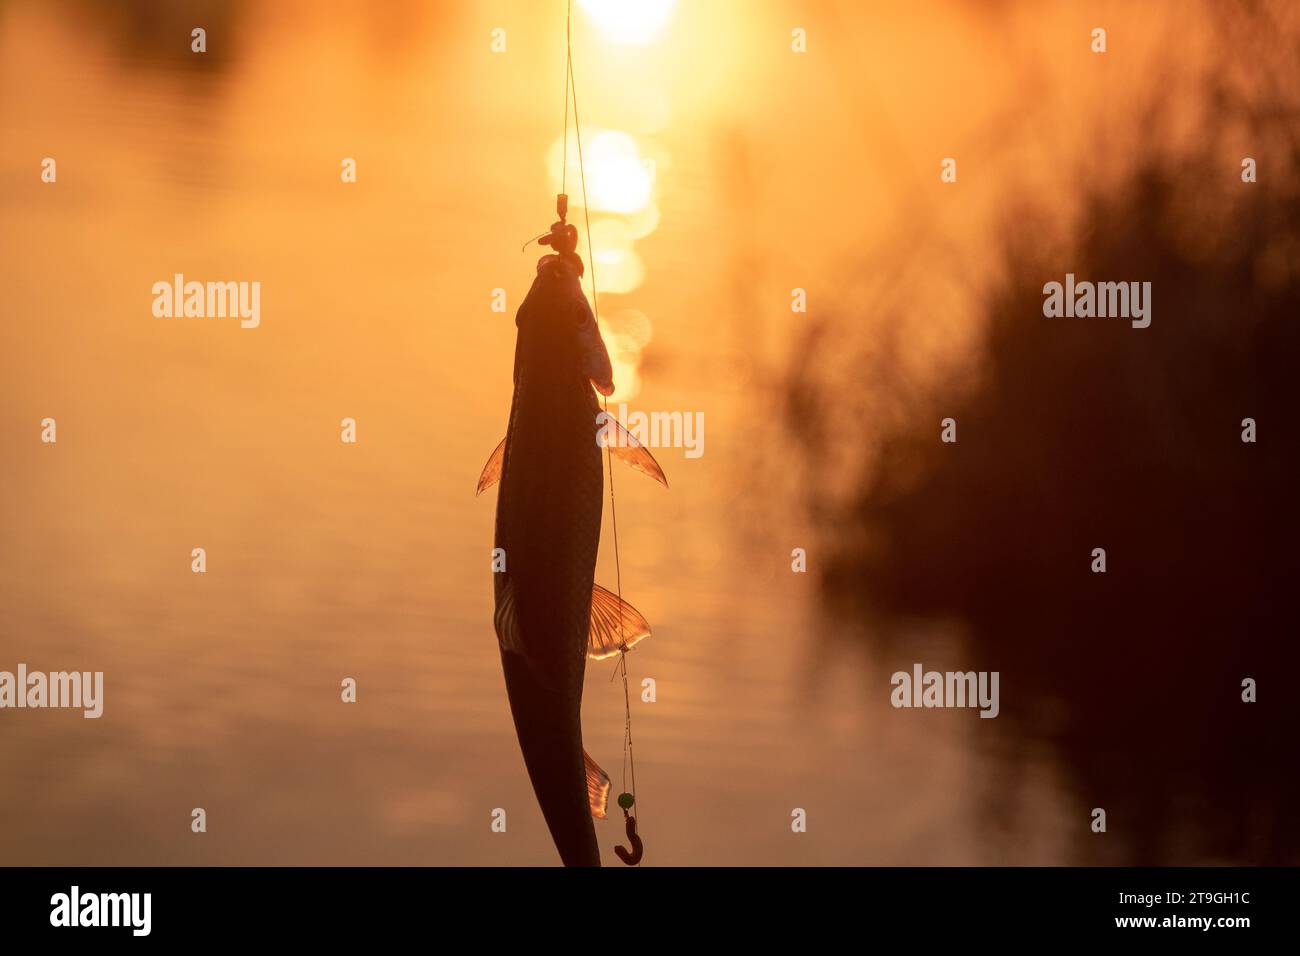 Roach. Gambling fishing on the river in the evening. Caught fish at sunset Stock Photo